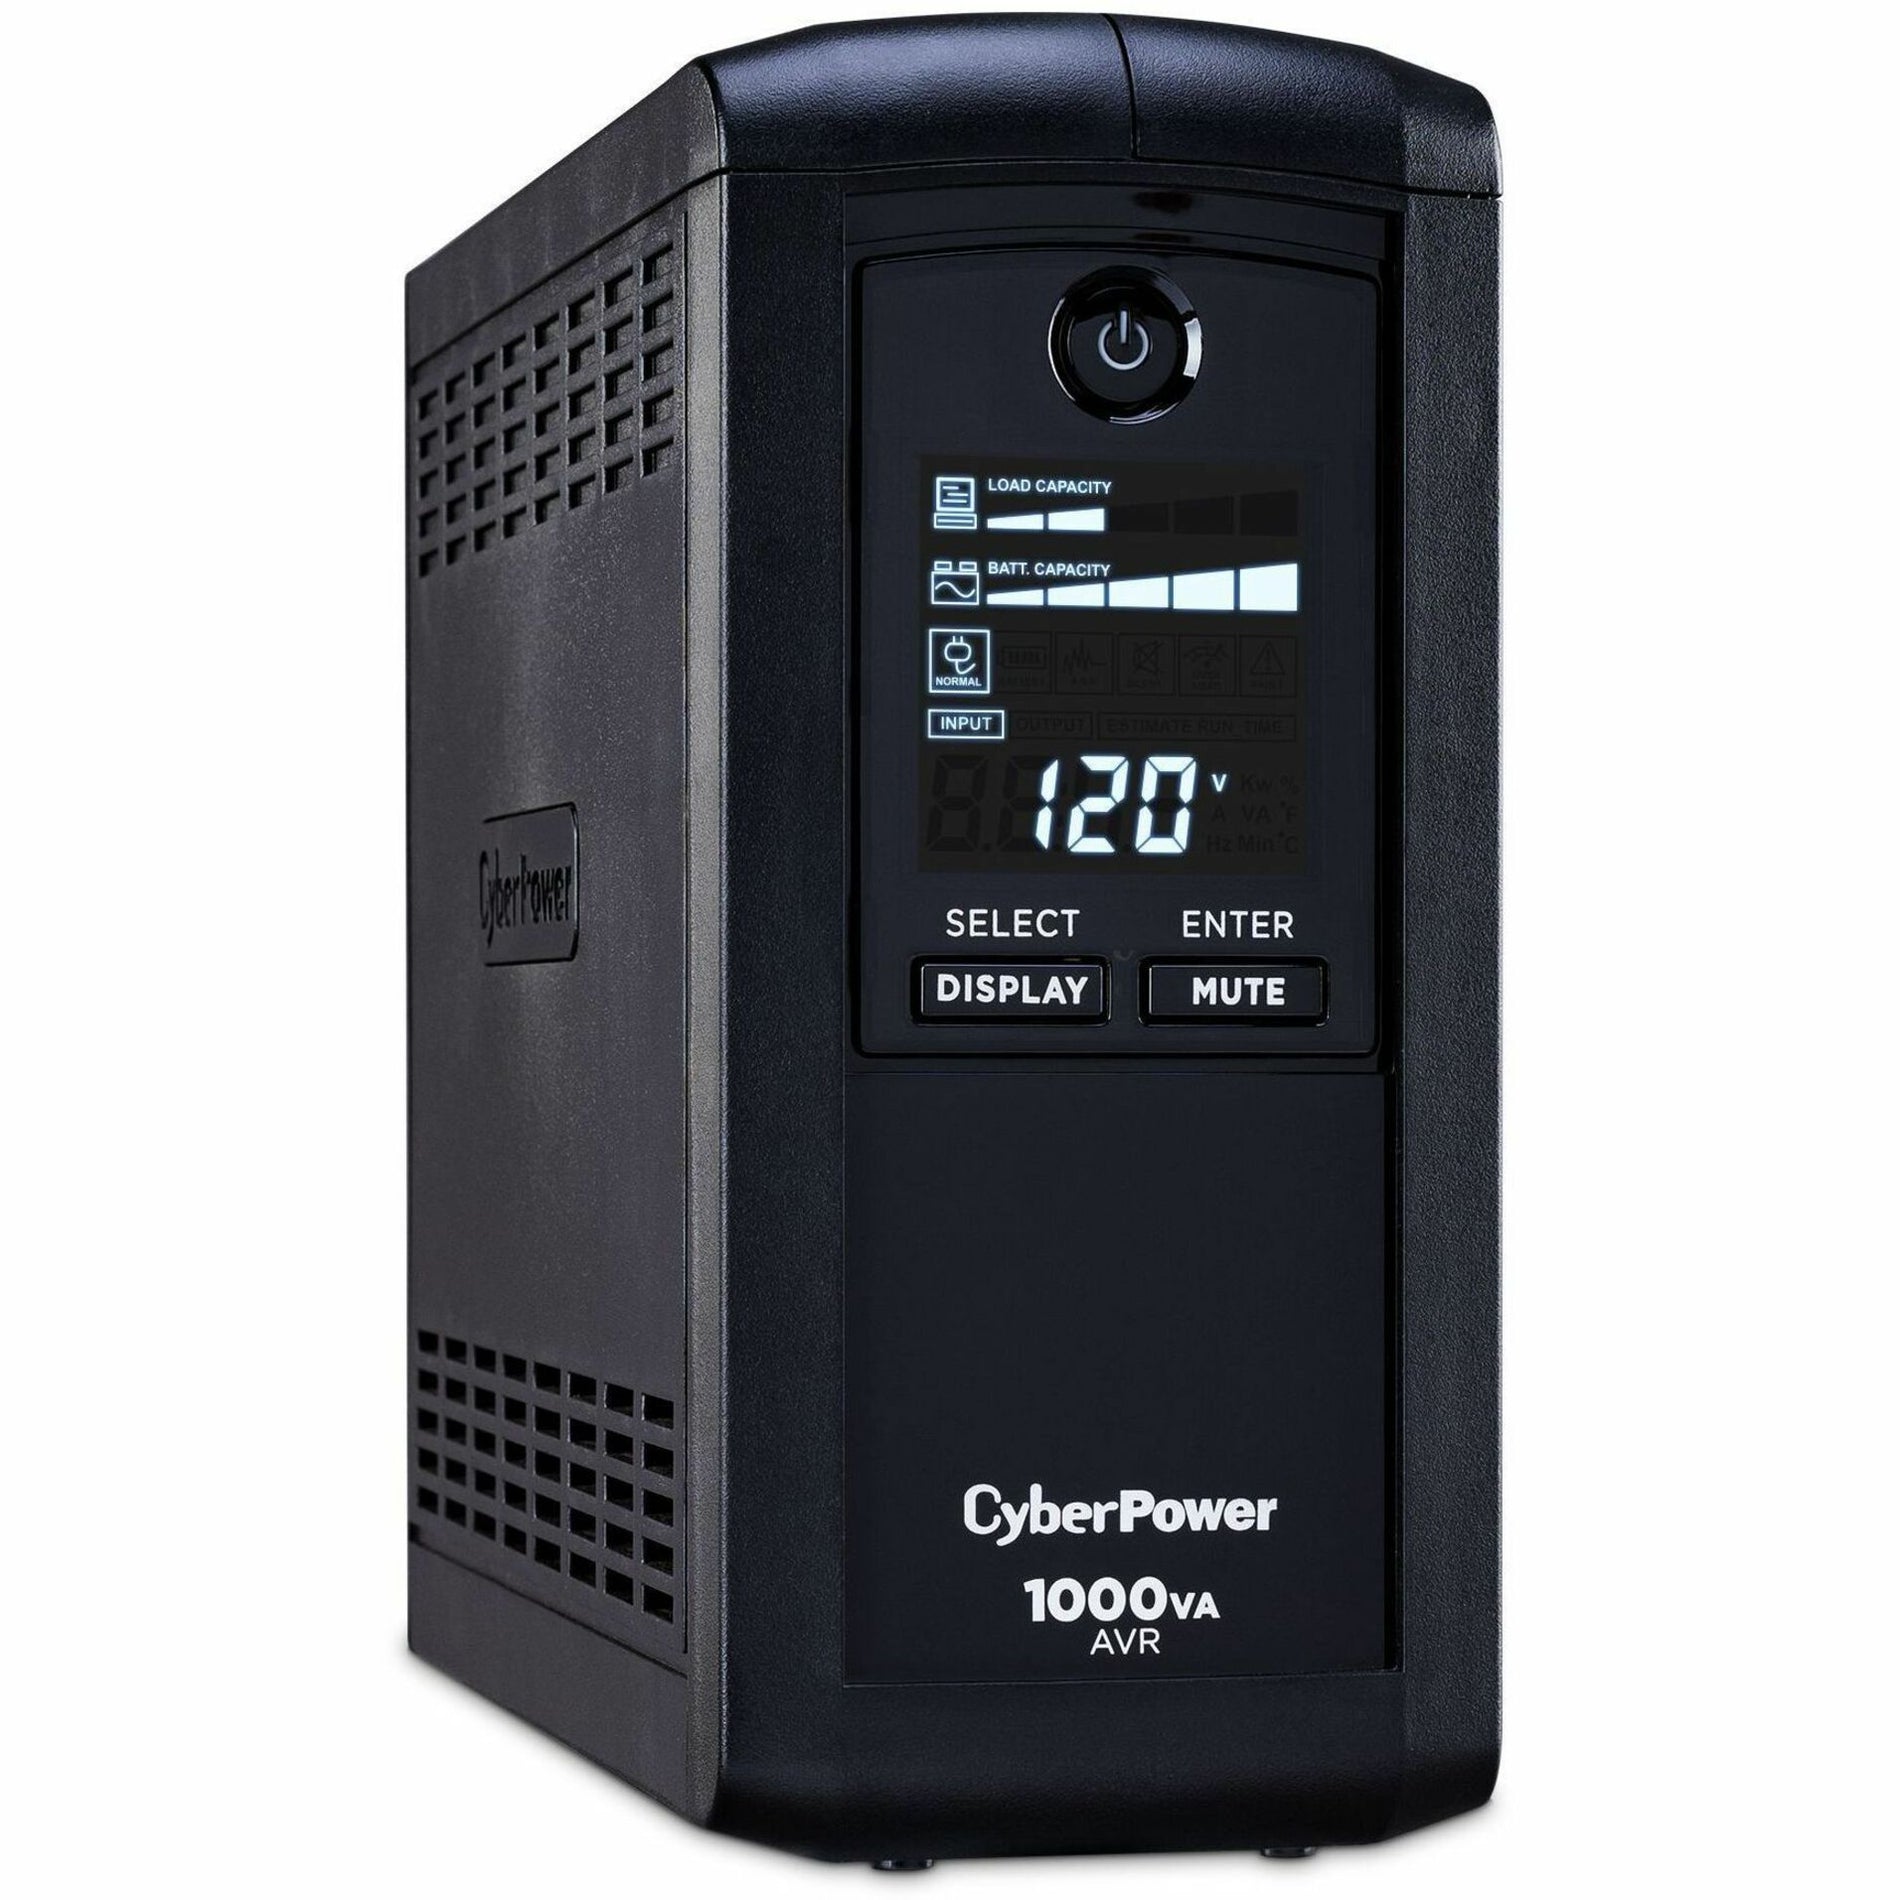 CyberPower CP1000AVRLCD Intelligent LCD UPS Systems, 1000VA Tower UPS, 3-Year Warranty, Energy Star Certified